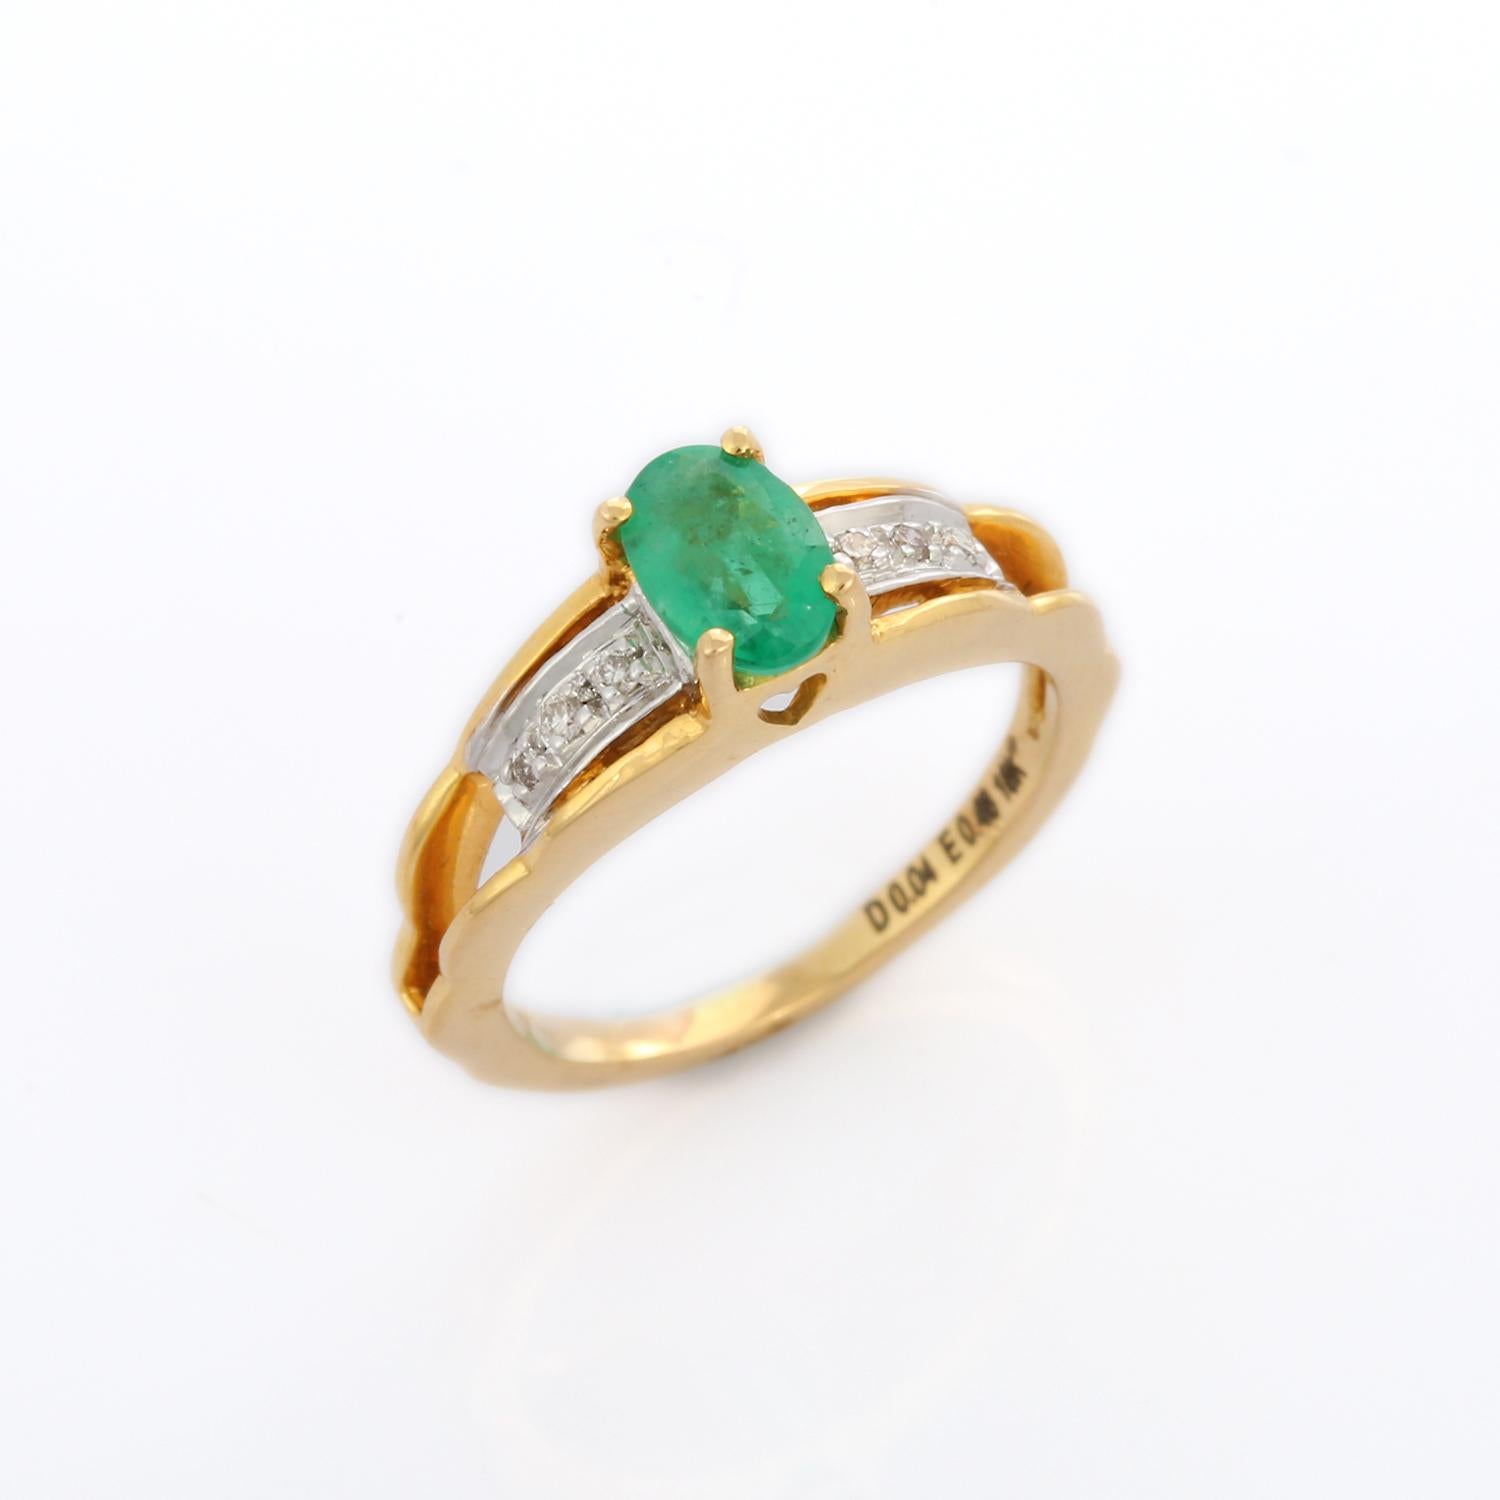 For Sale:  18K Yellow Gold Oval Shaped Emerald Ring with Diamonds 8